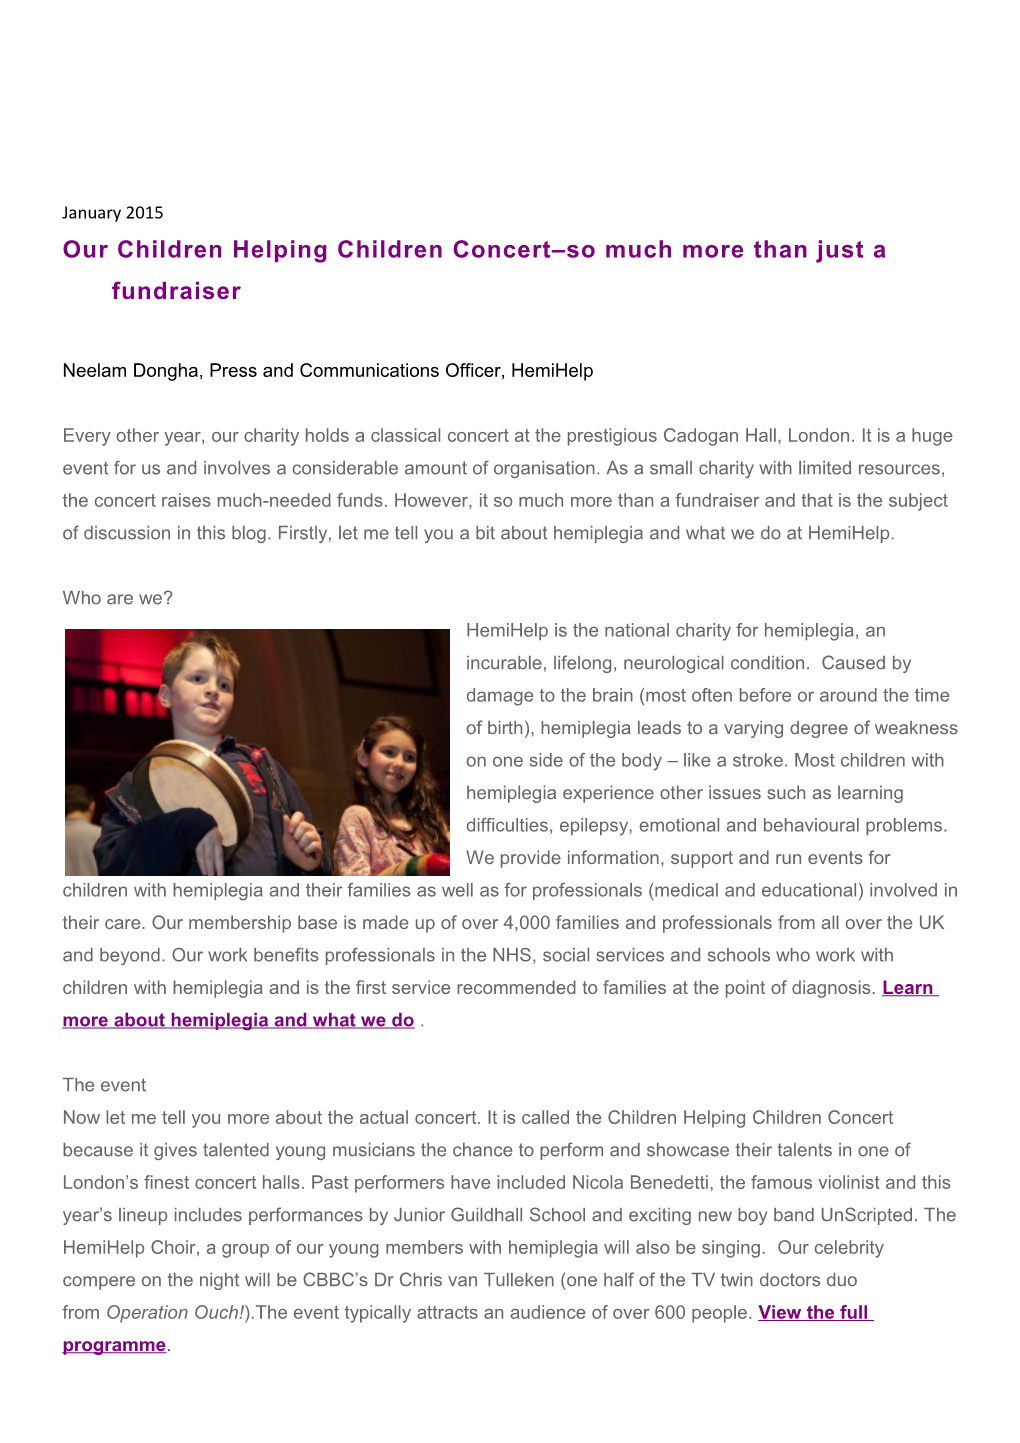 Our Children Helping Children Concert So Much More Than Just a Fundraiser